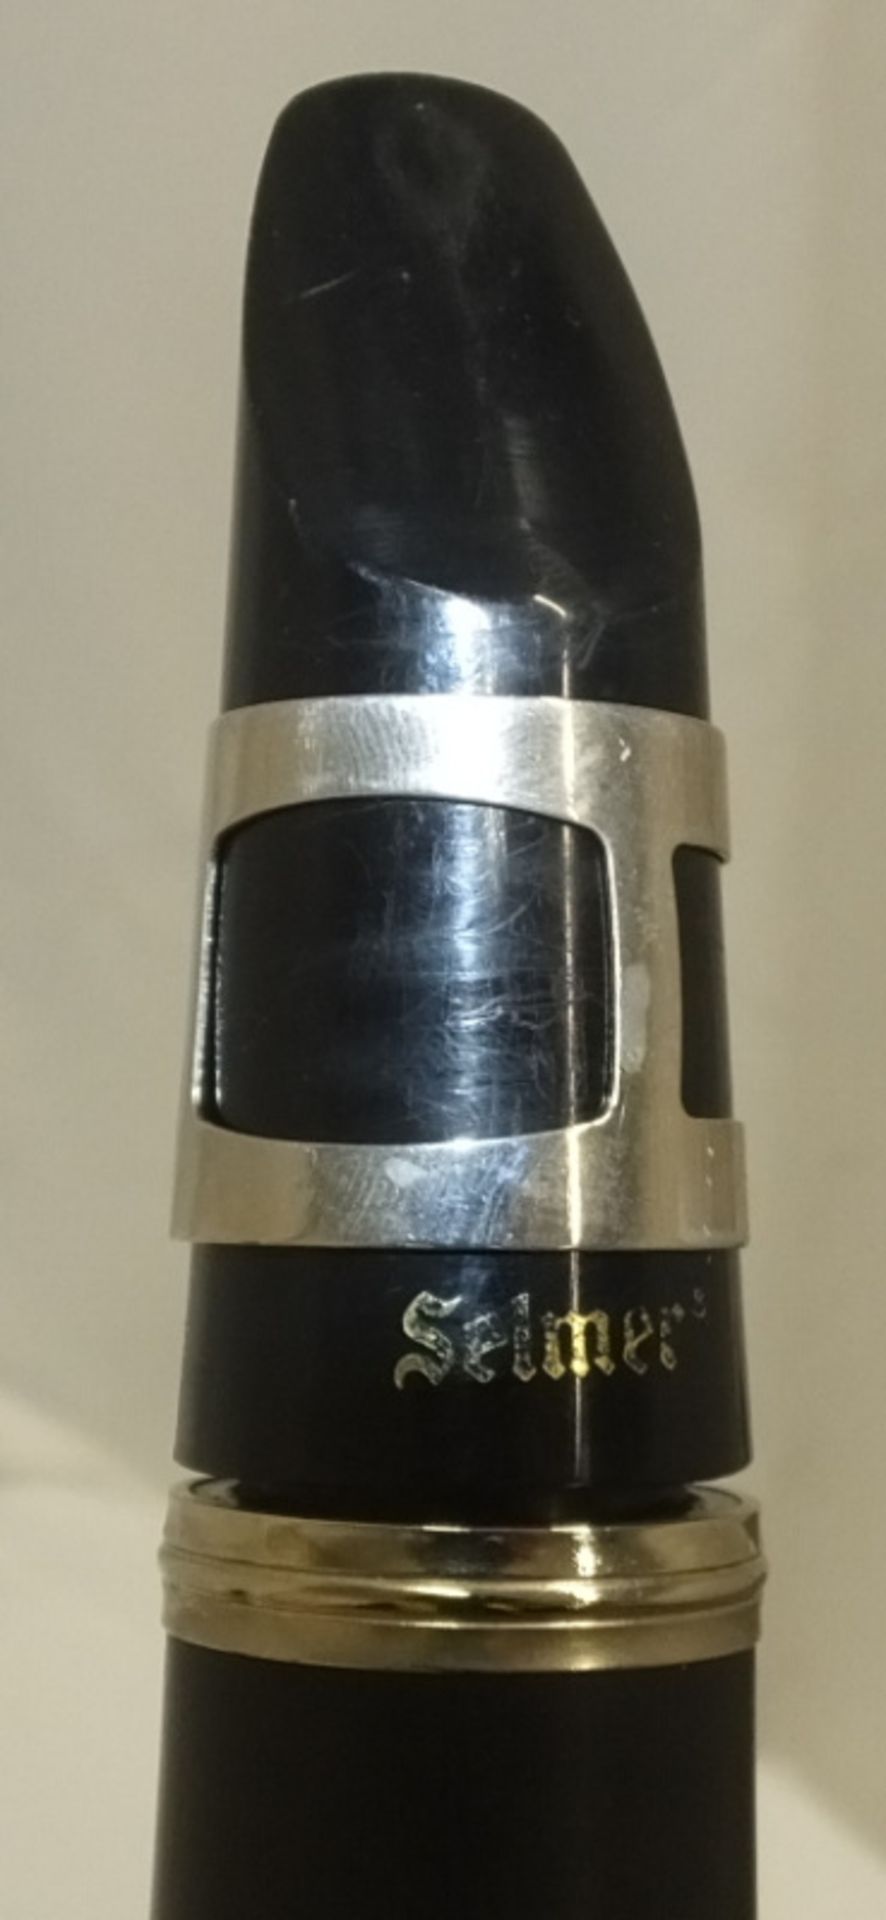 Buffet Crampon & Cie B12 Clarinet in case - serial number 730673 - Please check photos carefully - Image 15 of 20